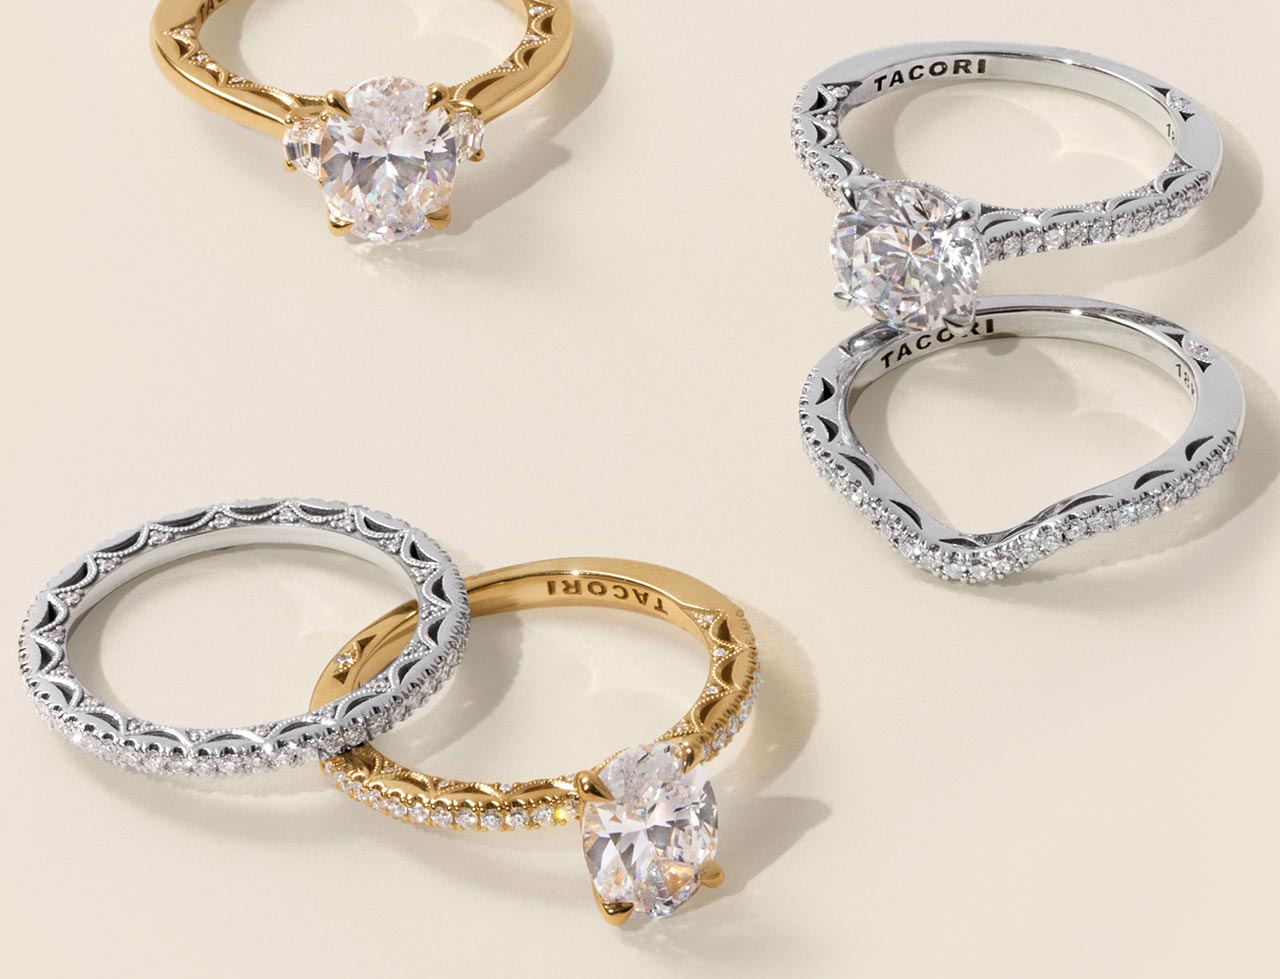 Variety of diamond engagement rings and wedding rings from the Tacori collection.